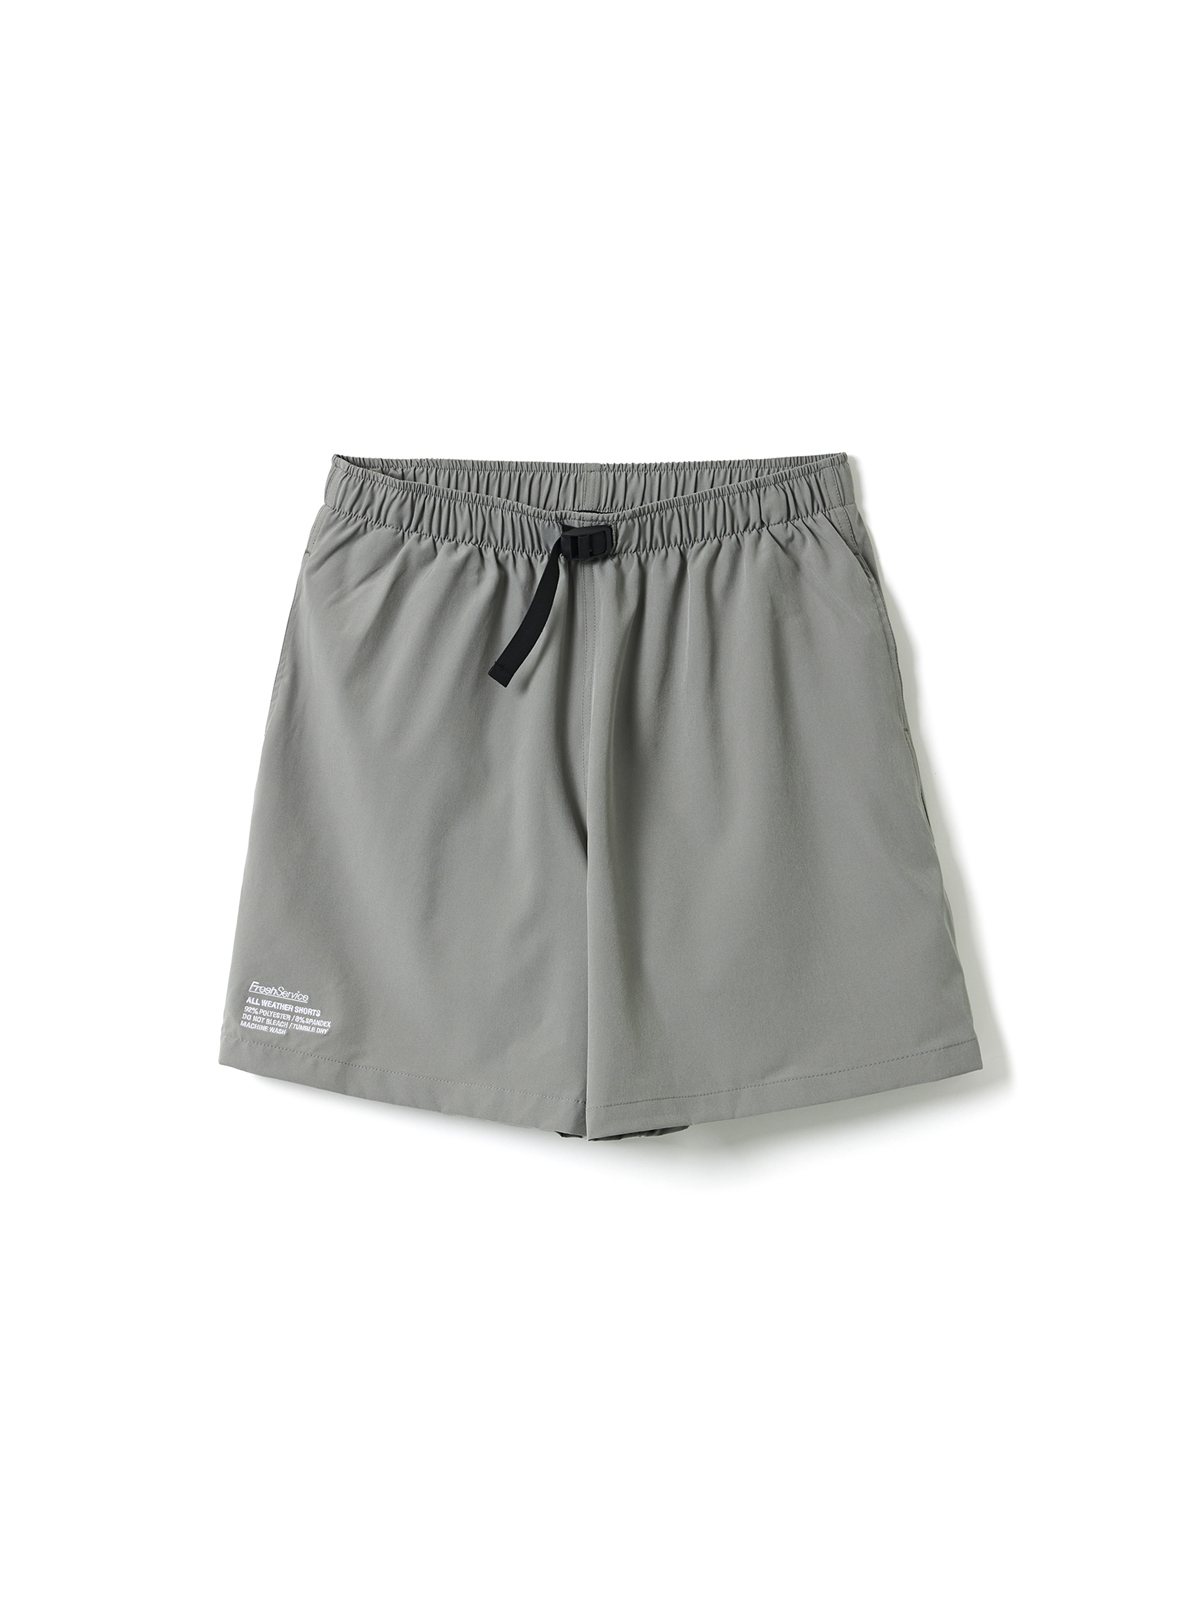 ALL WEATHER SHORTS (GRAY)